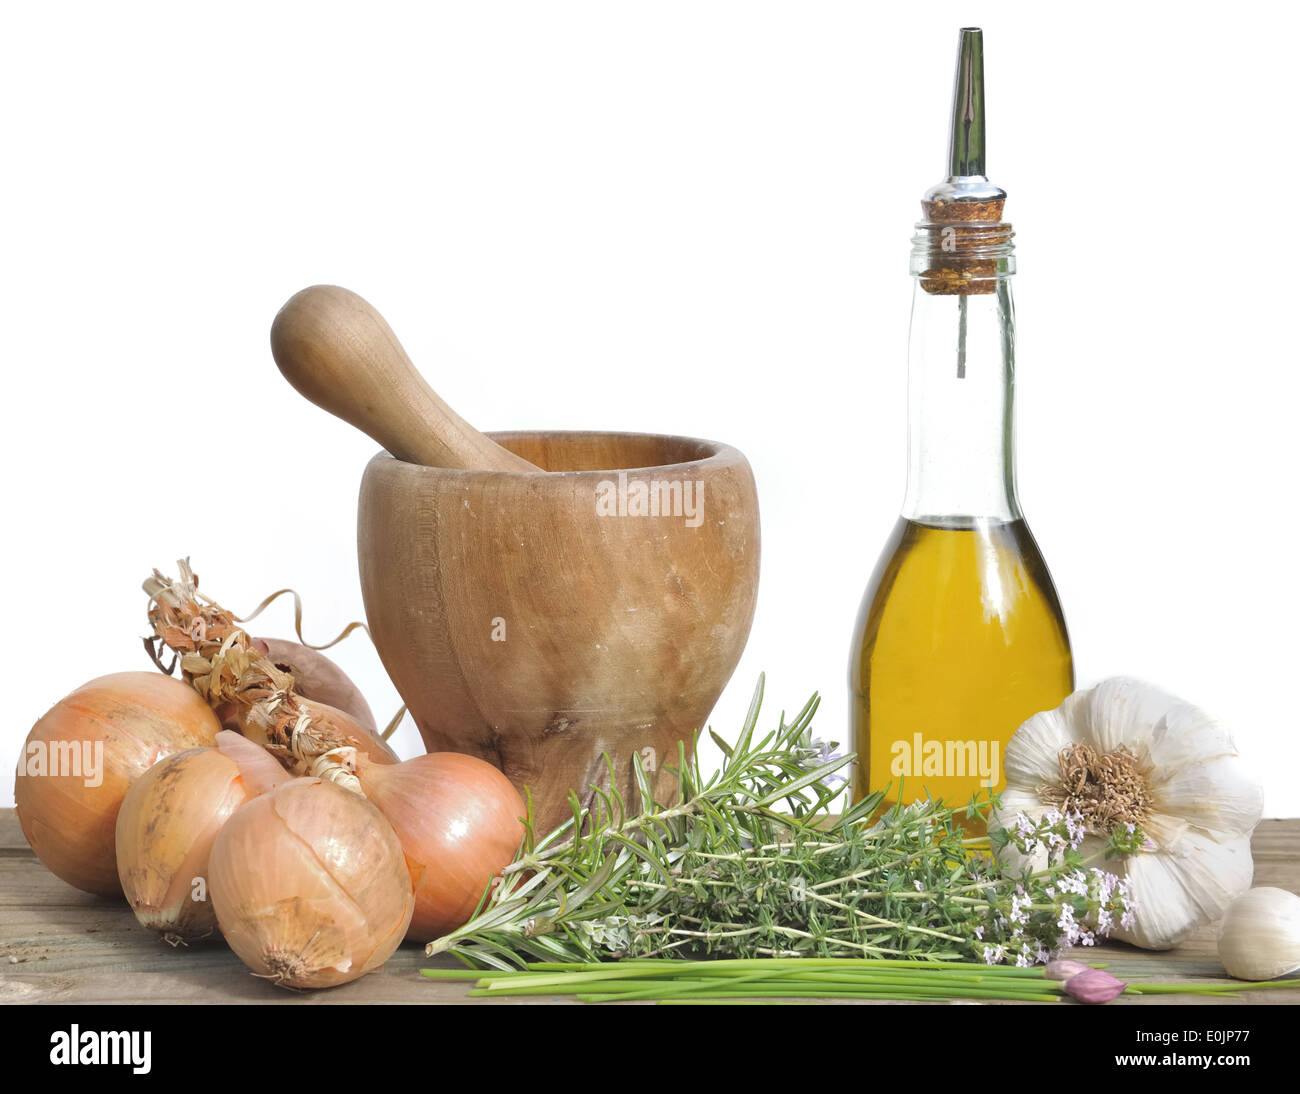 Aromatic herbs, onions, garlic and oil bottle for seasoning Stock Photo